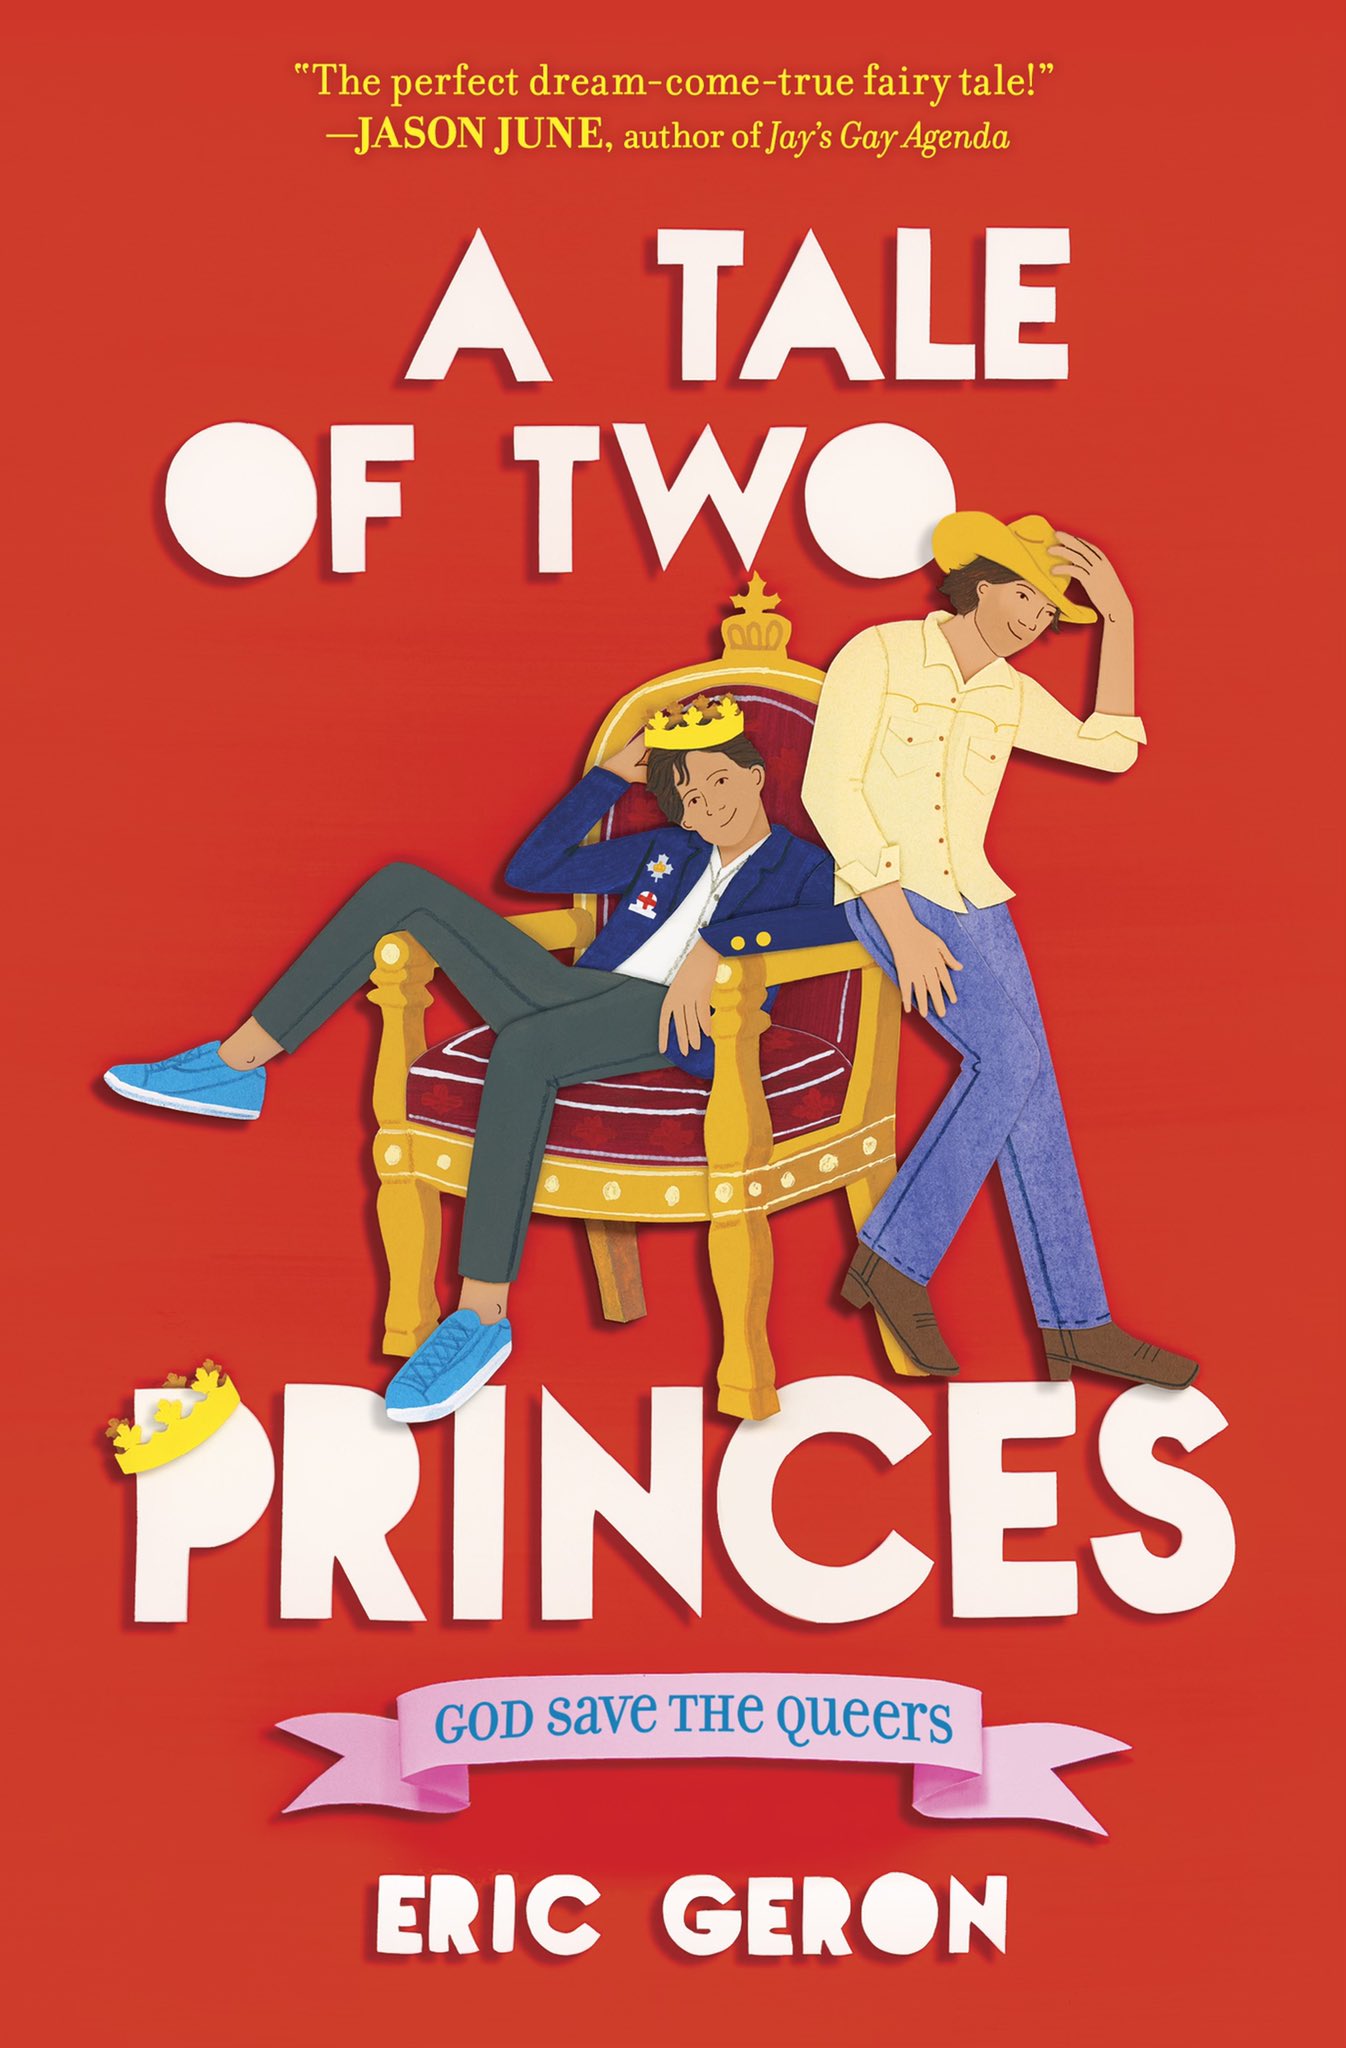 A_Tale_of_Two_Princes_-_Eric_Geron